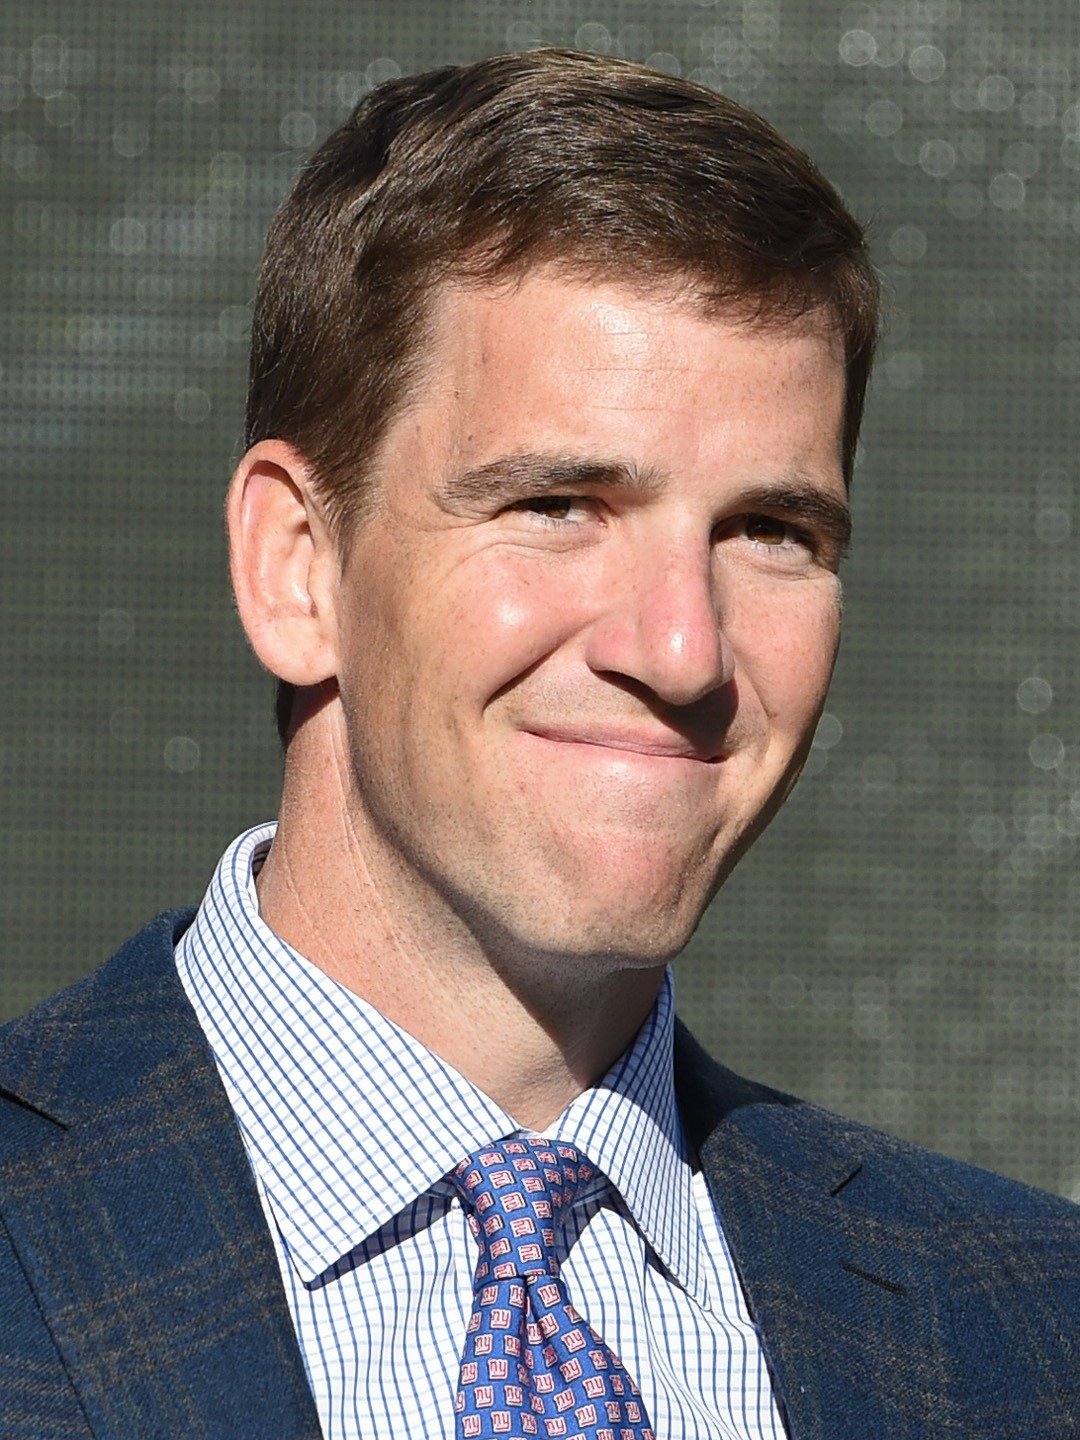 How tall is Eli Manning?